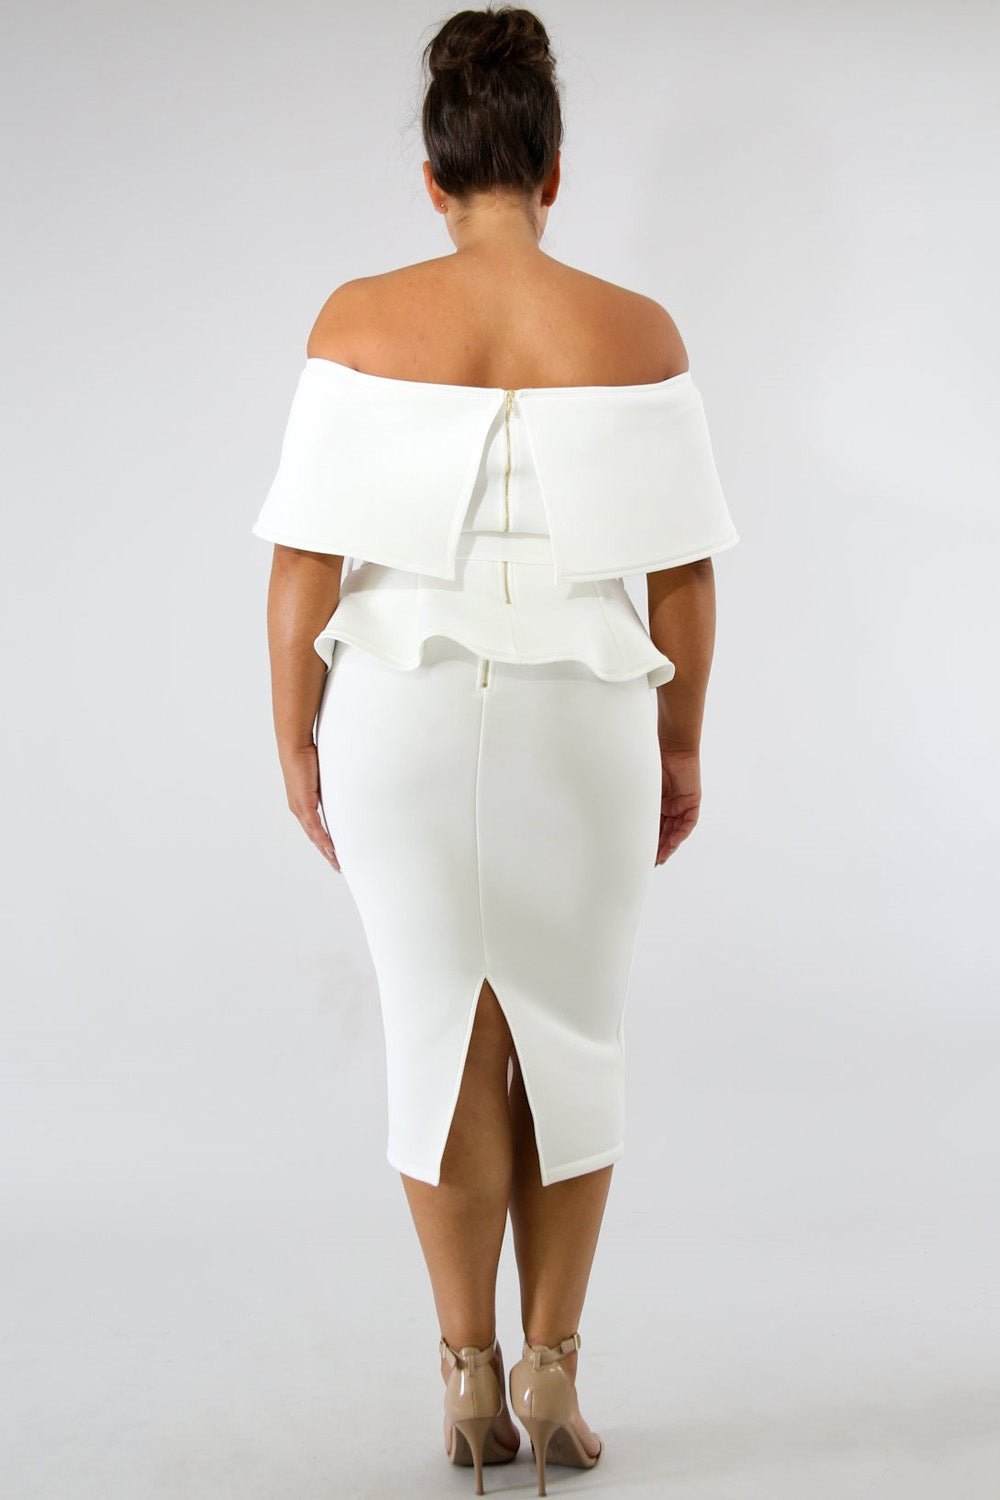 goPals white 2 piece set plus size with off-the-shoulder top and pencil skirt. 